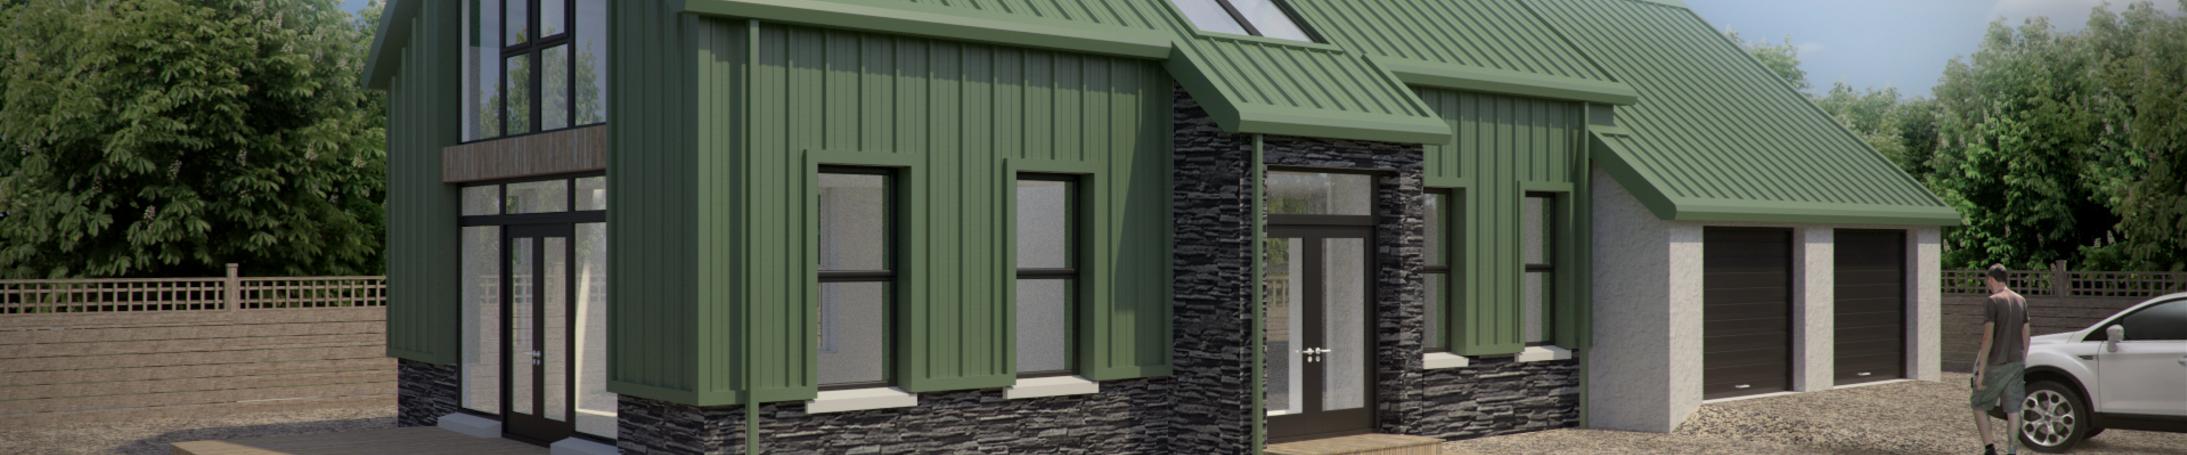 3D Visualisation of Contemporary New Dwelling, Cullybackey